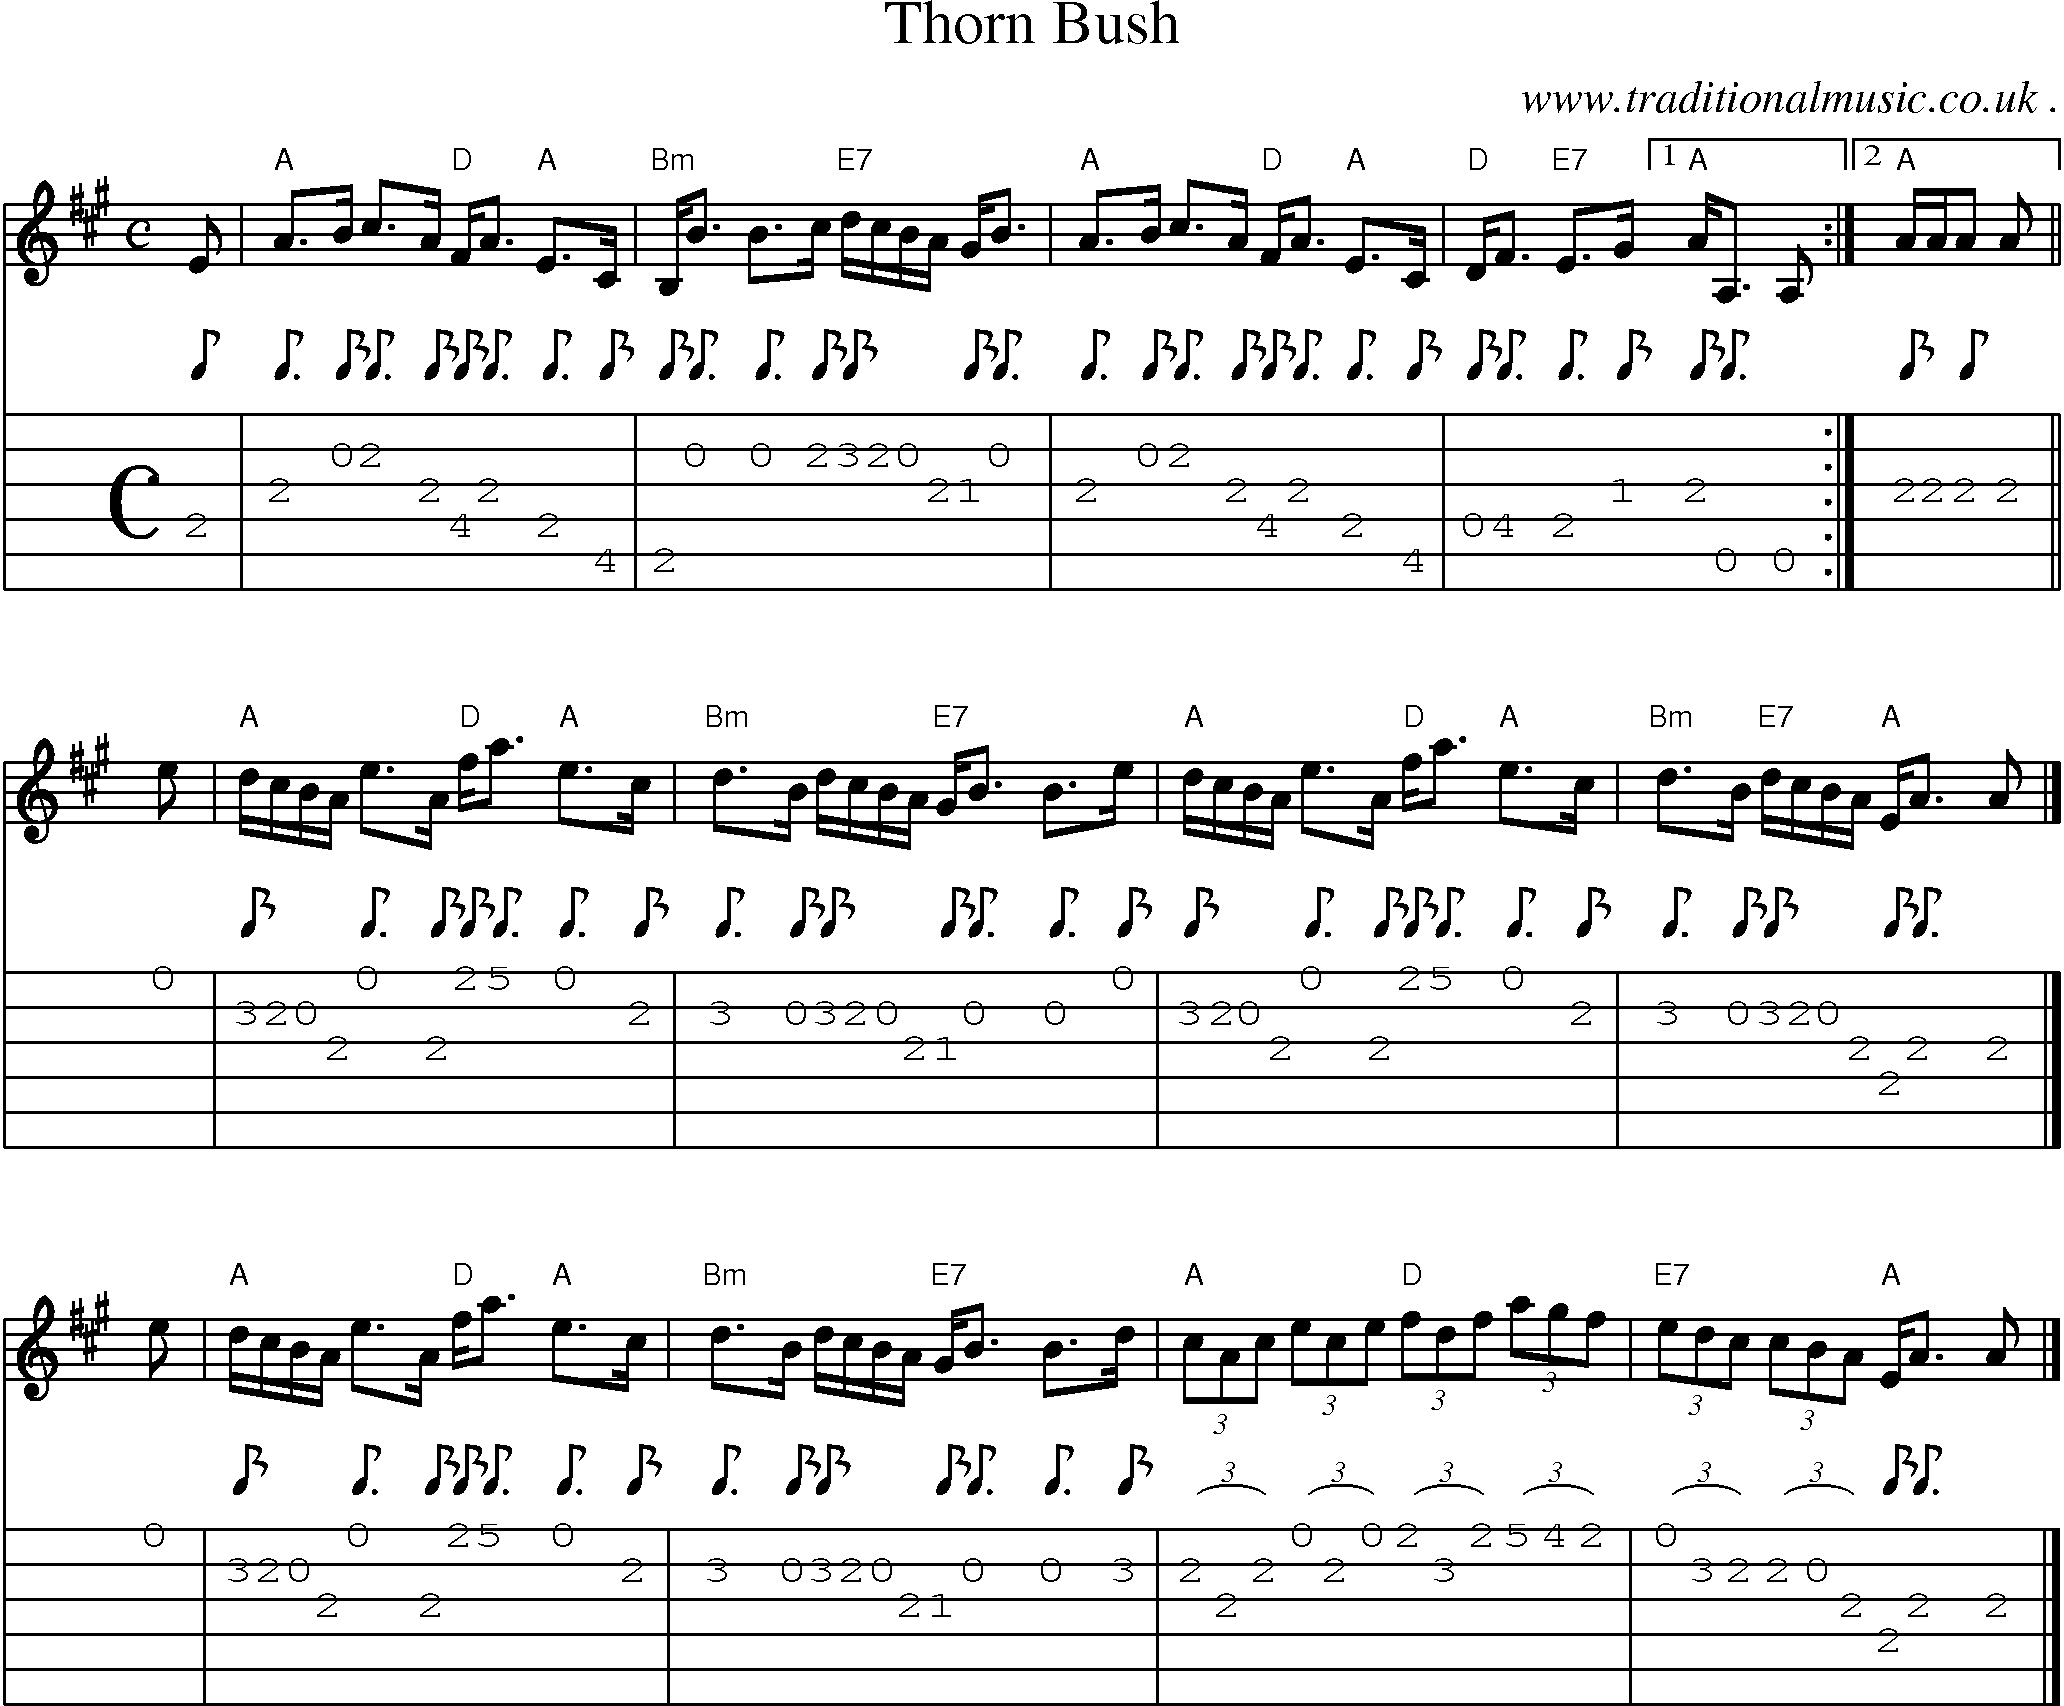 Sheet-music  score, Chords and Guitar Tabs for Thorn Bush